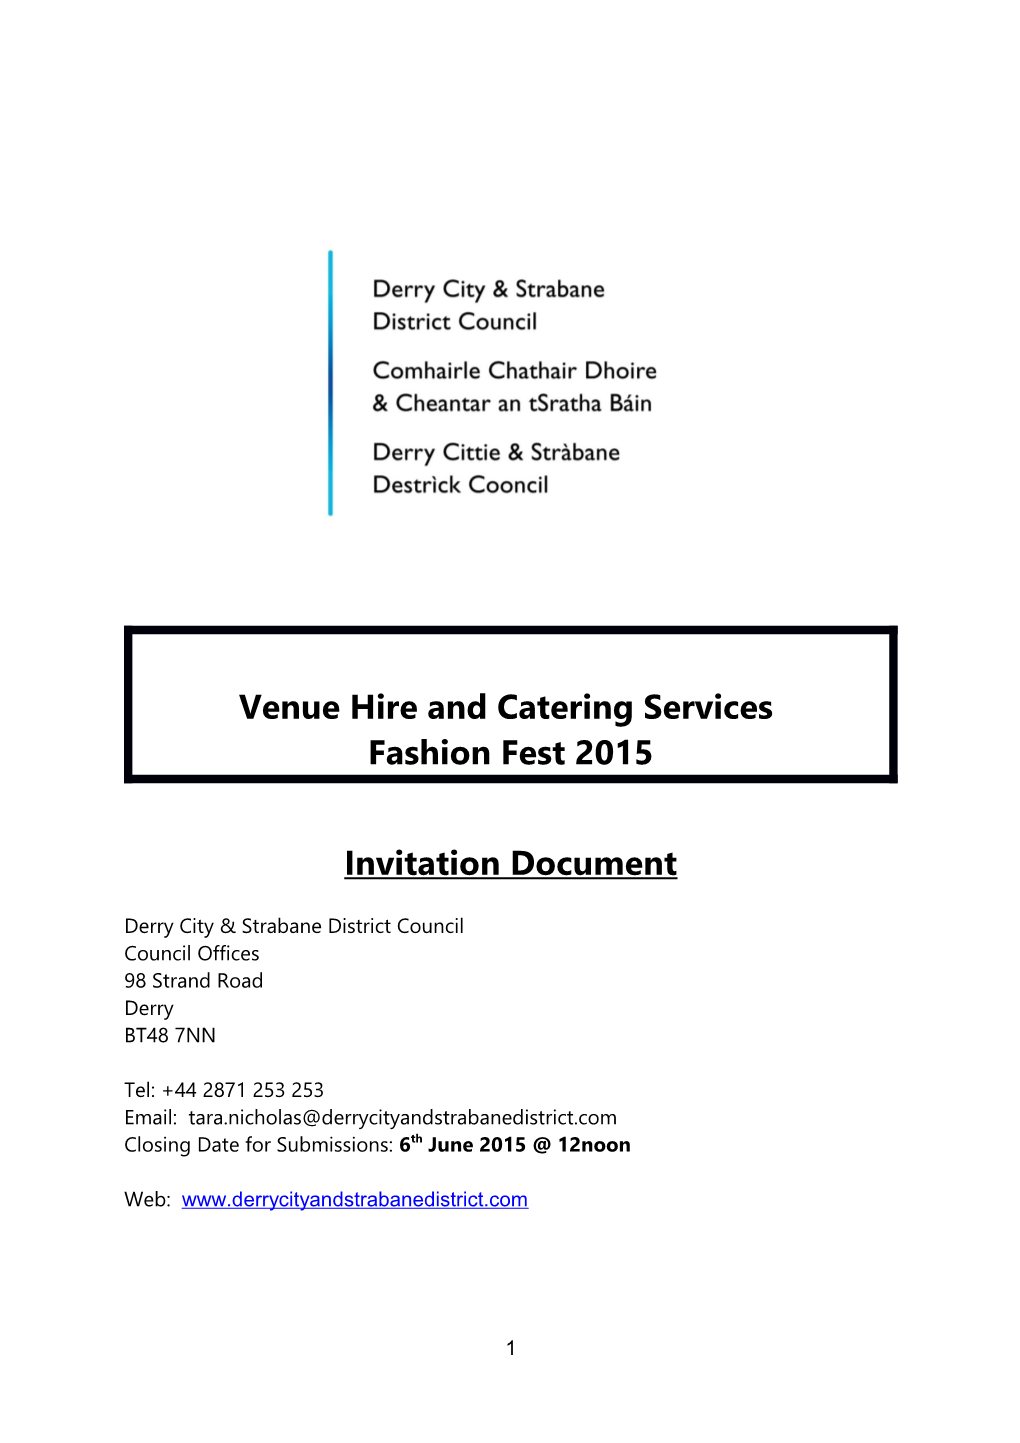 Venue Hire and Catering Services